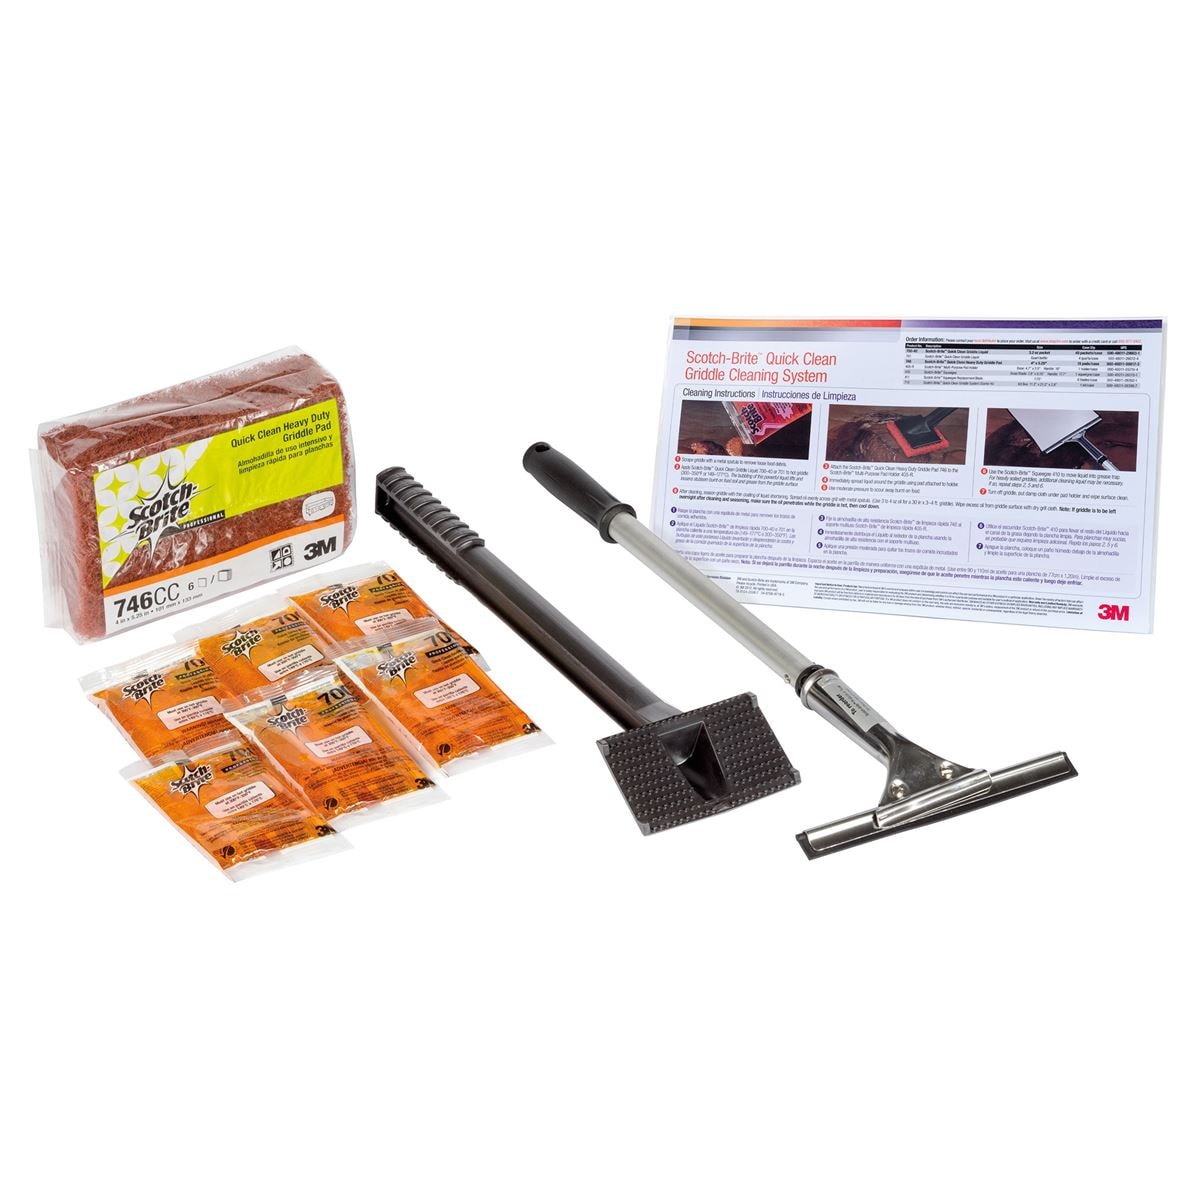 https://www.subzero-wolf.com/-/media/images/united-states/widen/accessories/acc_griddle_cleaning_kit_812278_jws_042516.jpg?quality=80&height=1200&width=1200&hash=87B247F82C72F0AD70D722C8EE9CBDFD